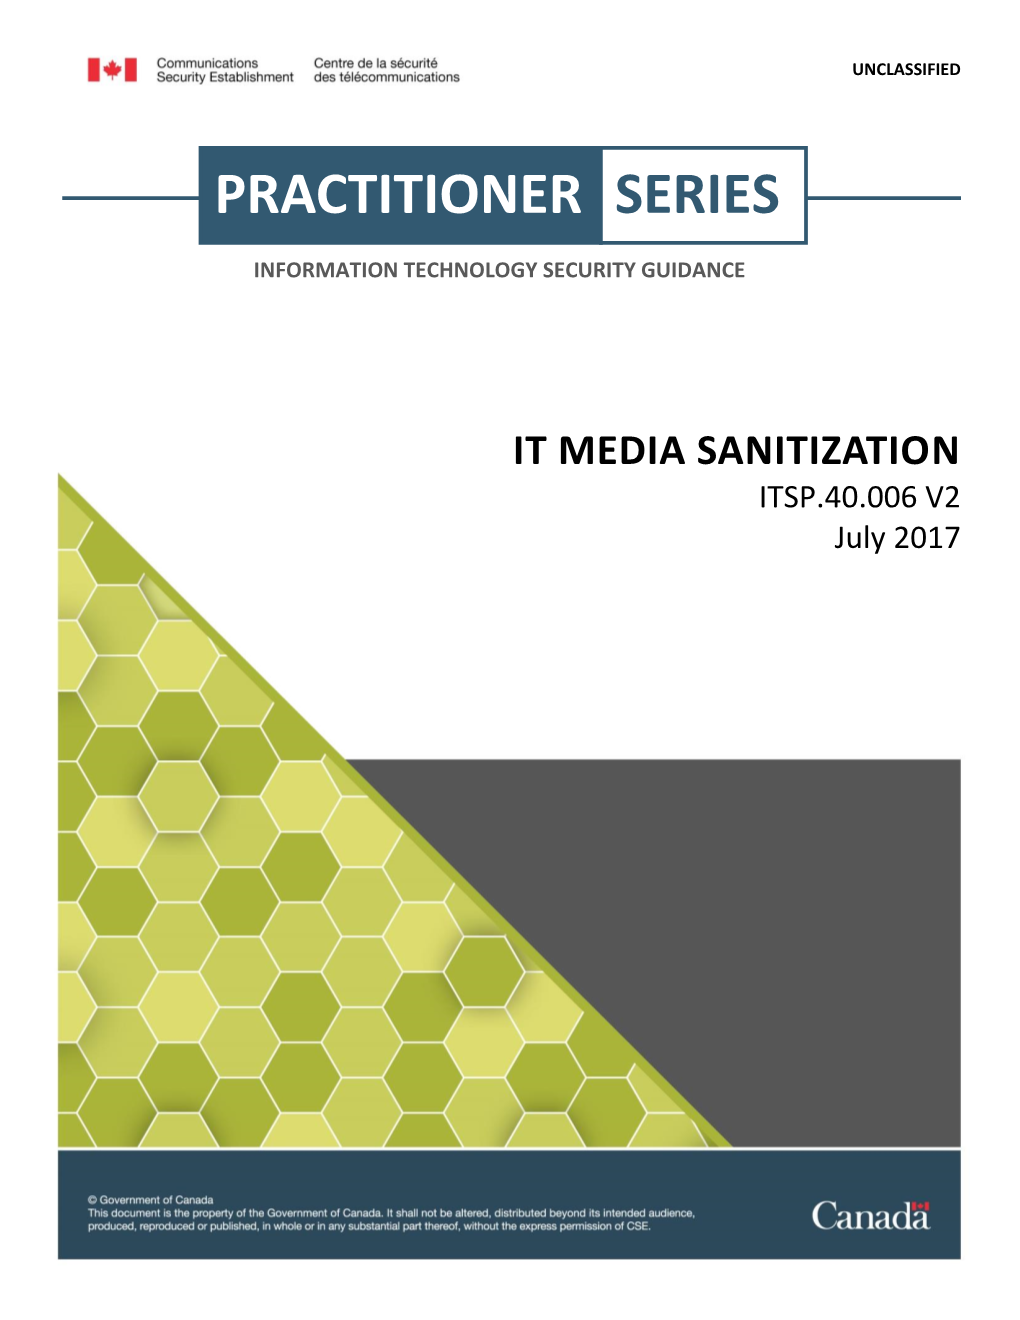 ITSP.40.006 V2 IT Media Sanitization Is an UNCLASSIFIED Publication, Issued Under the Authority of the Chief, Communications Security Establishment (CSE)